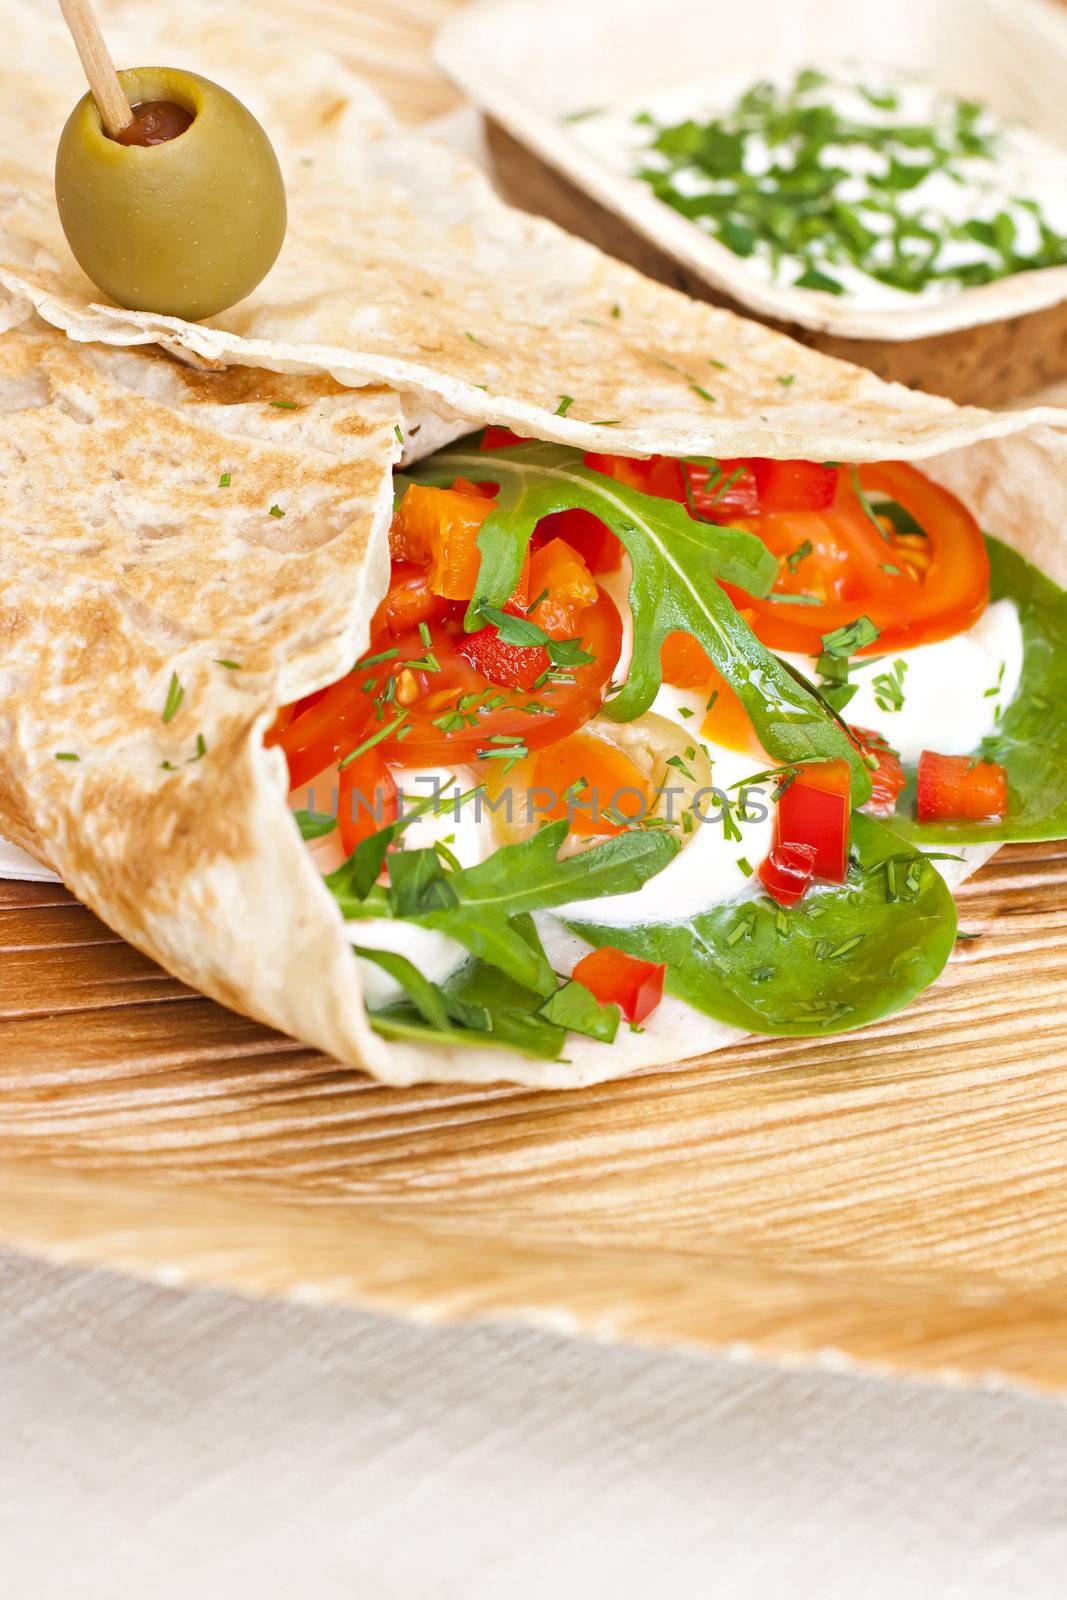 wheat wrap with olive filled with tomato, mozarello, bell pepper and salad. Some dip.